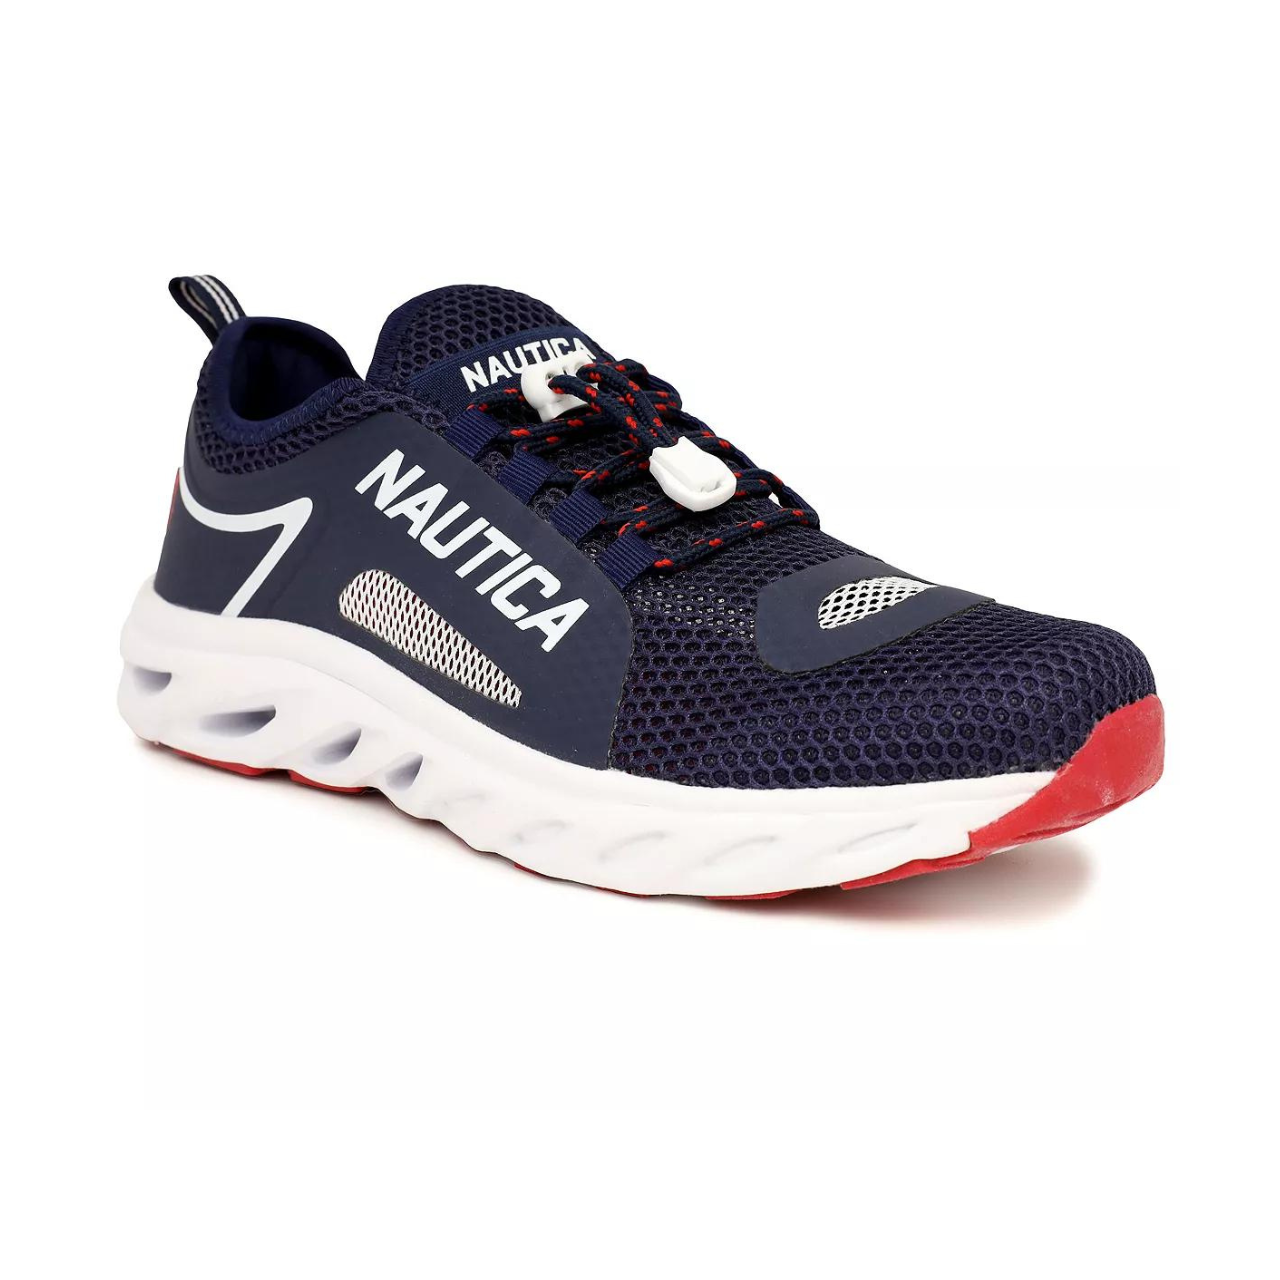 Nautica Men's Jogging Quick Dry Pool Sports Water Shoes